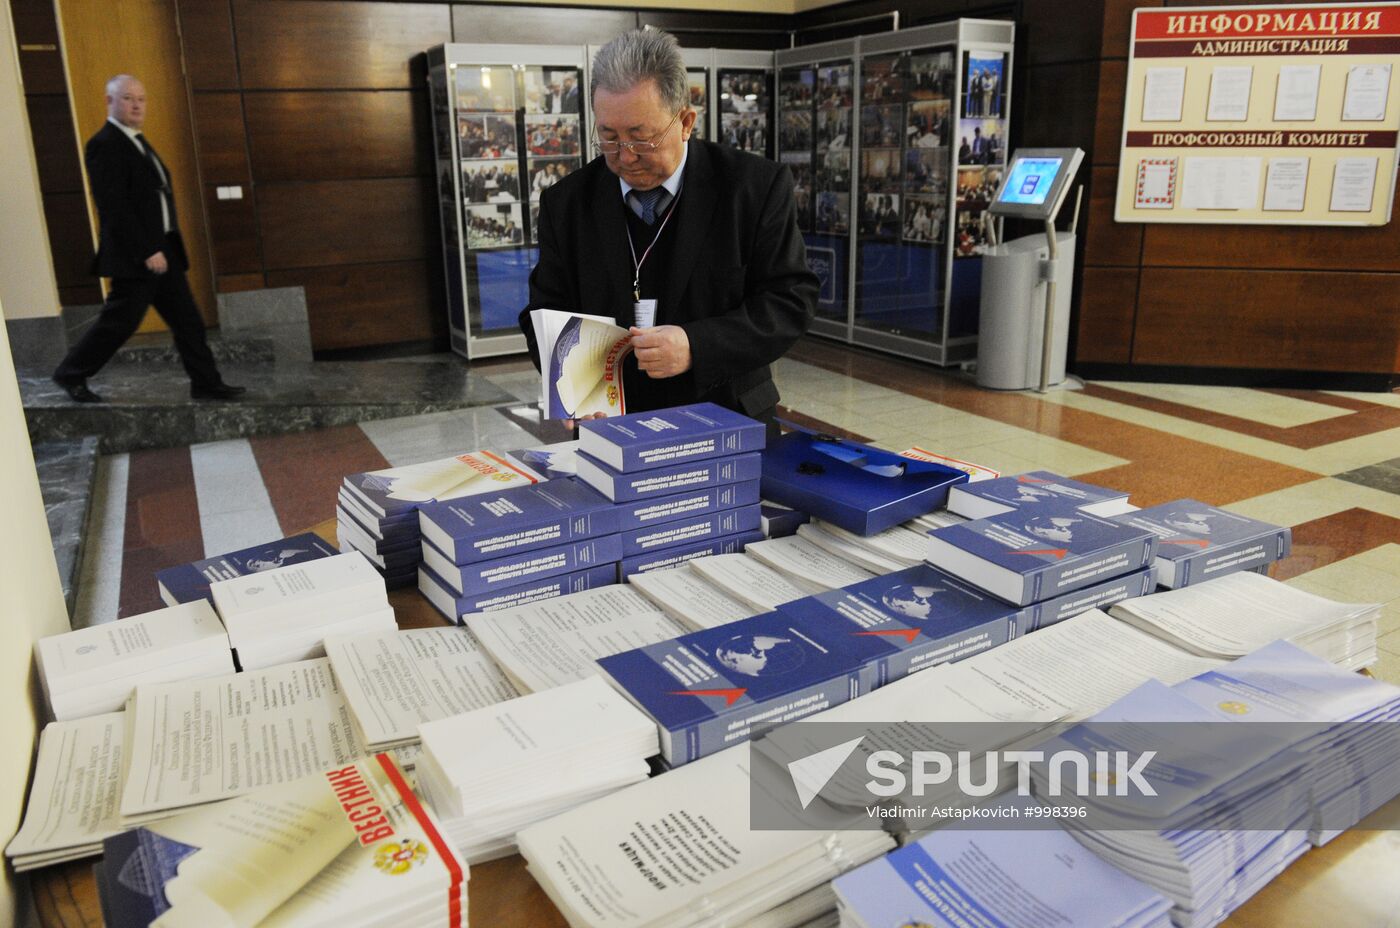 Observers monitor CEC operations during Russia's 2011 elections